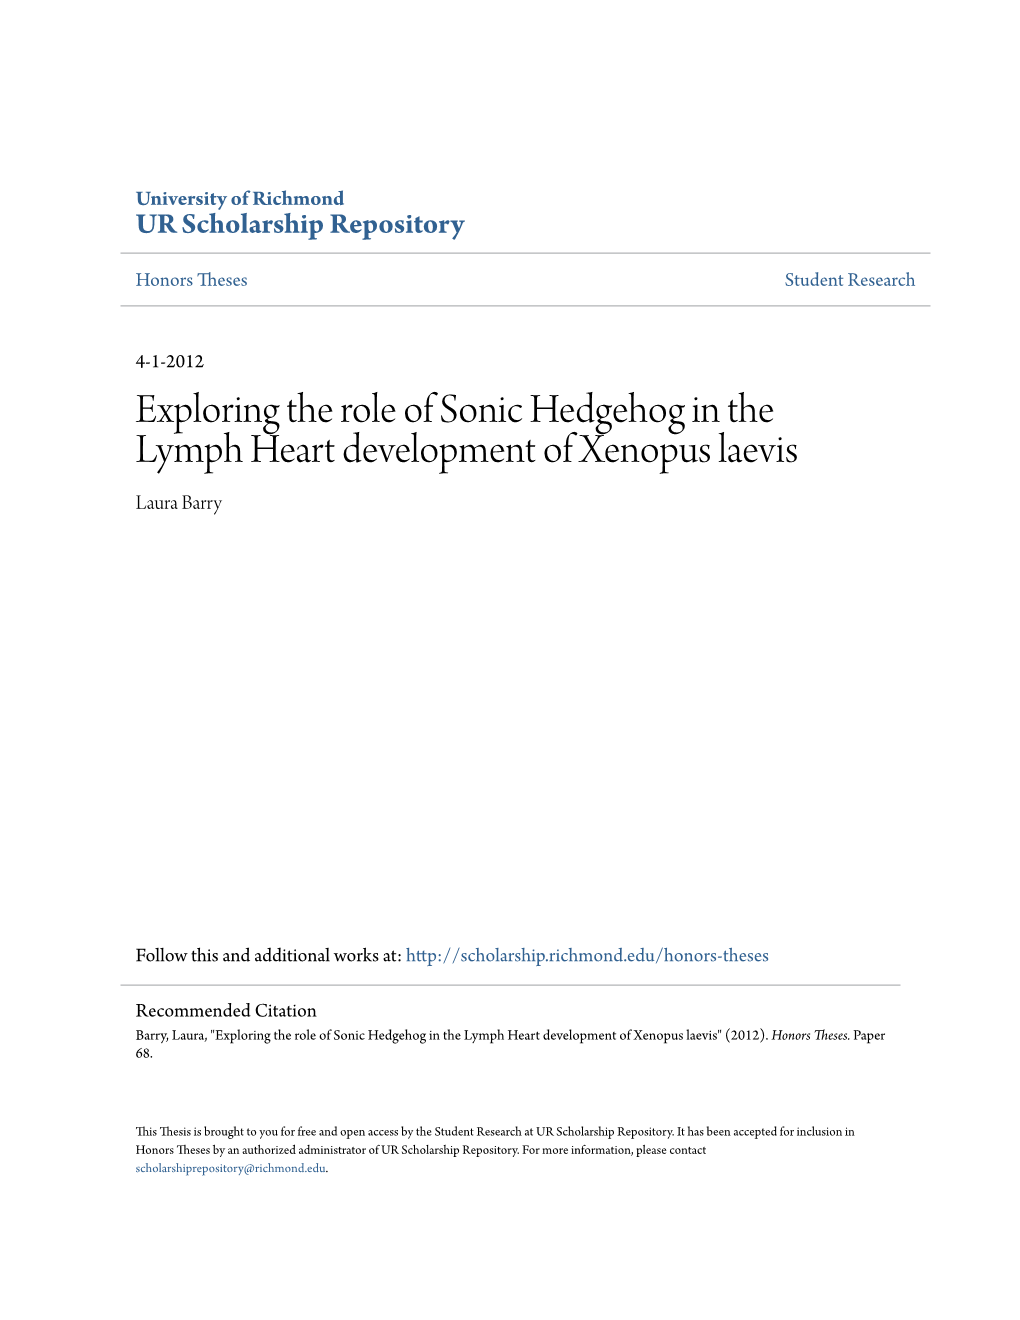 Exploring the Role of Sonic Hedgehog in the Lymph Heart Development of Xenopus Laevis Laura Barry